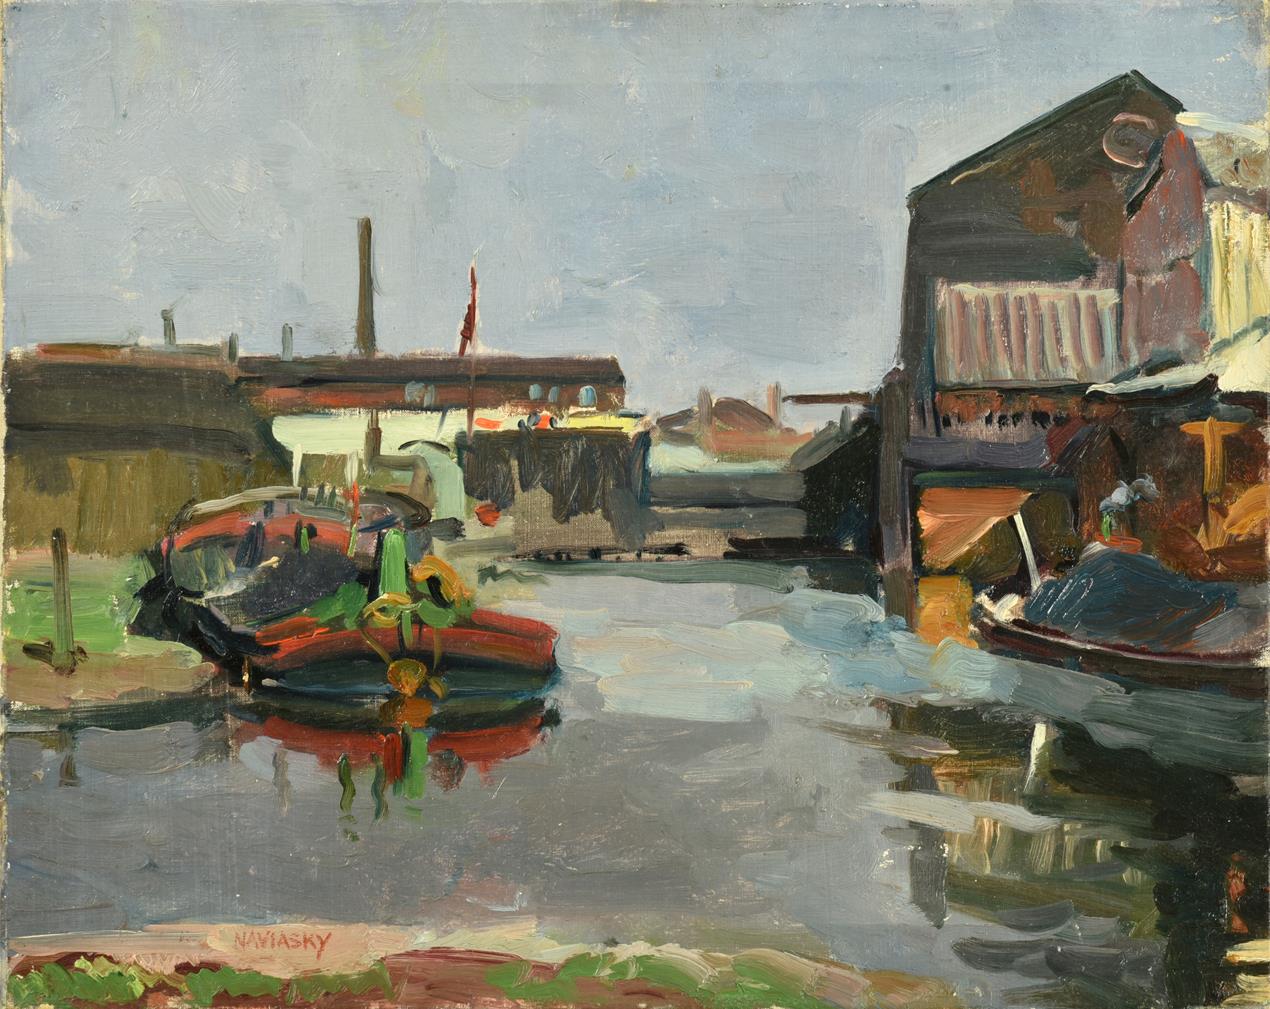 Lot 61 - Philip Naviasky (1894-1983) Docklands with barge Signed, oil on canvas, 40cm by 50.5cm...